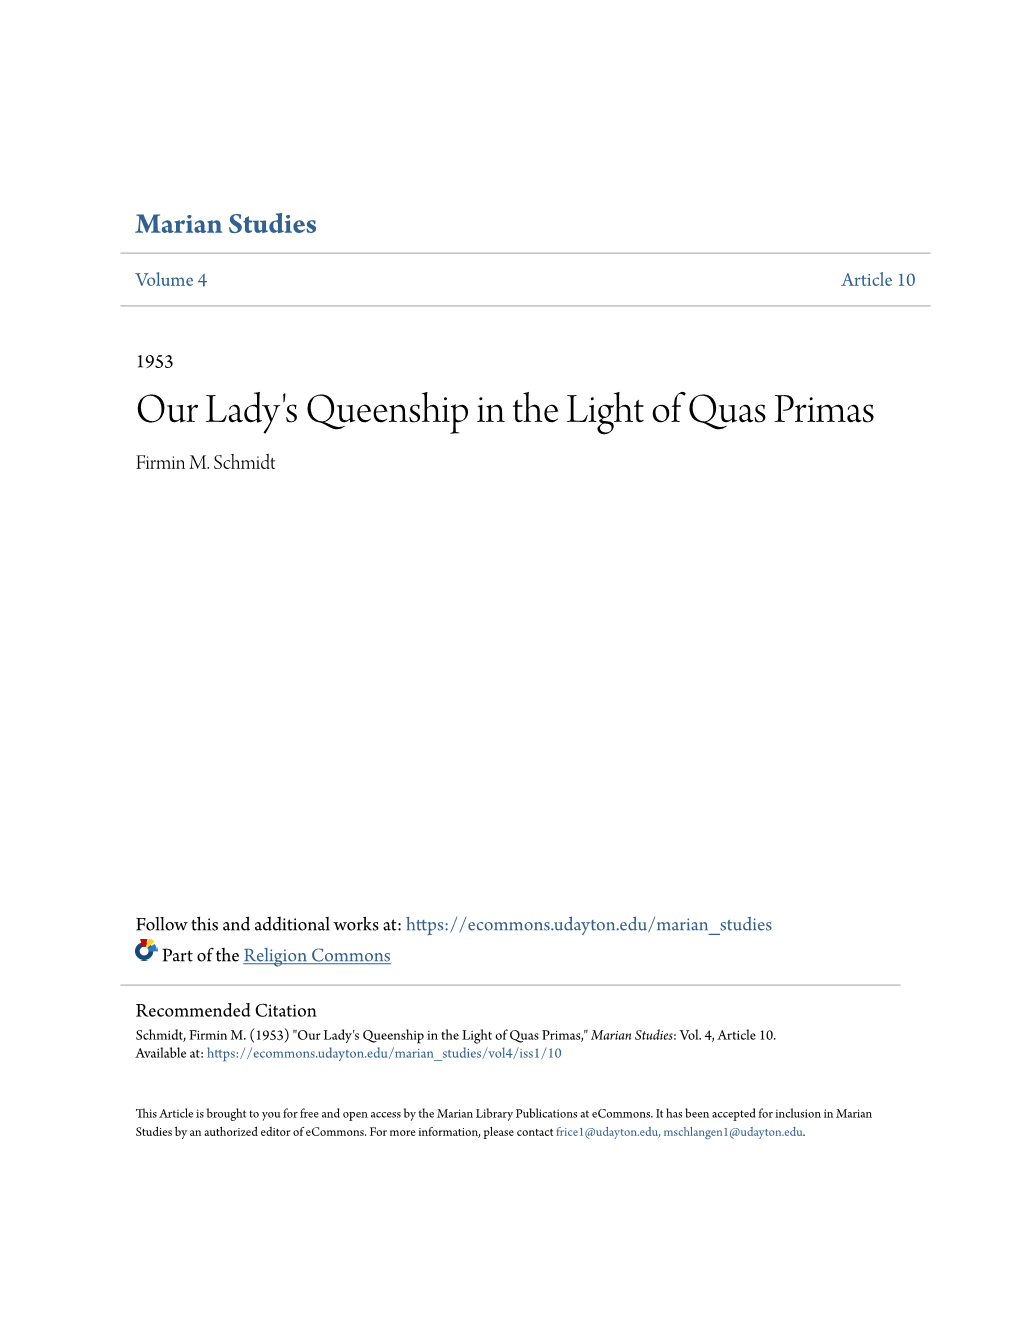 Our Lady's Queenship in the Light of Quas Primas Firmin M